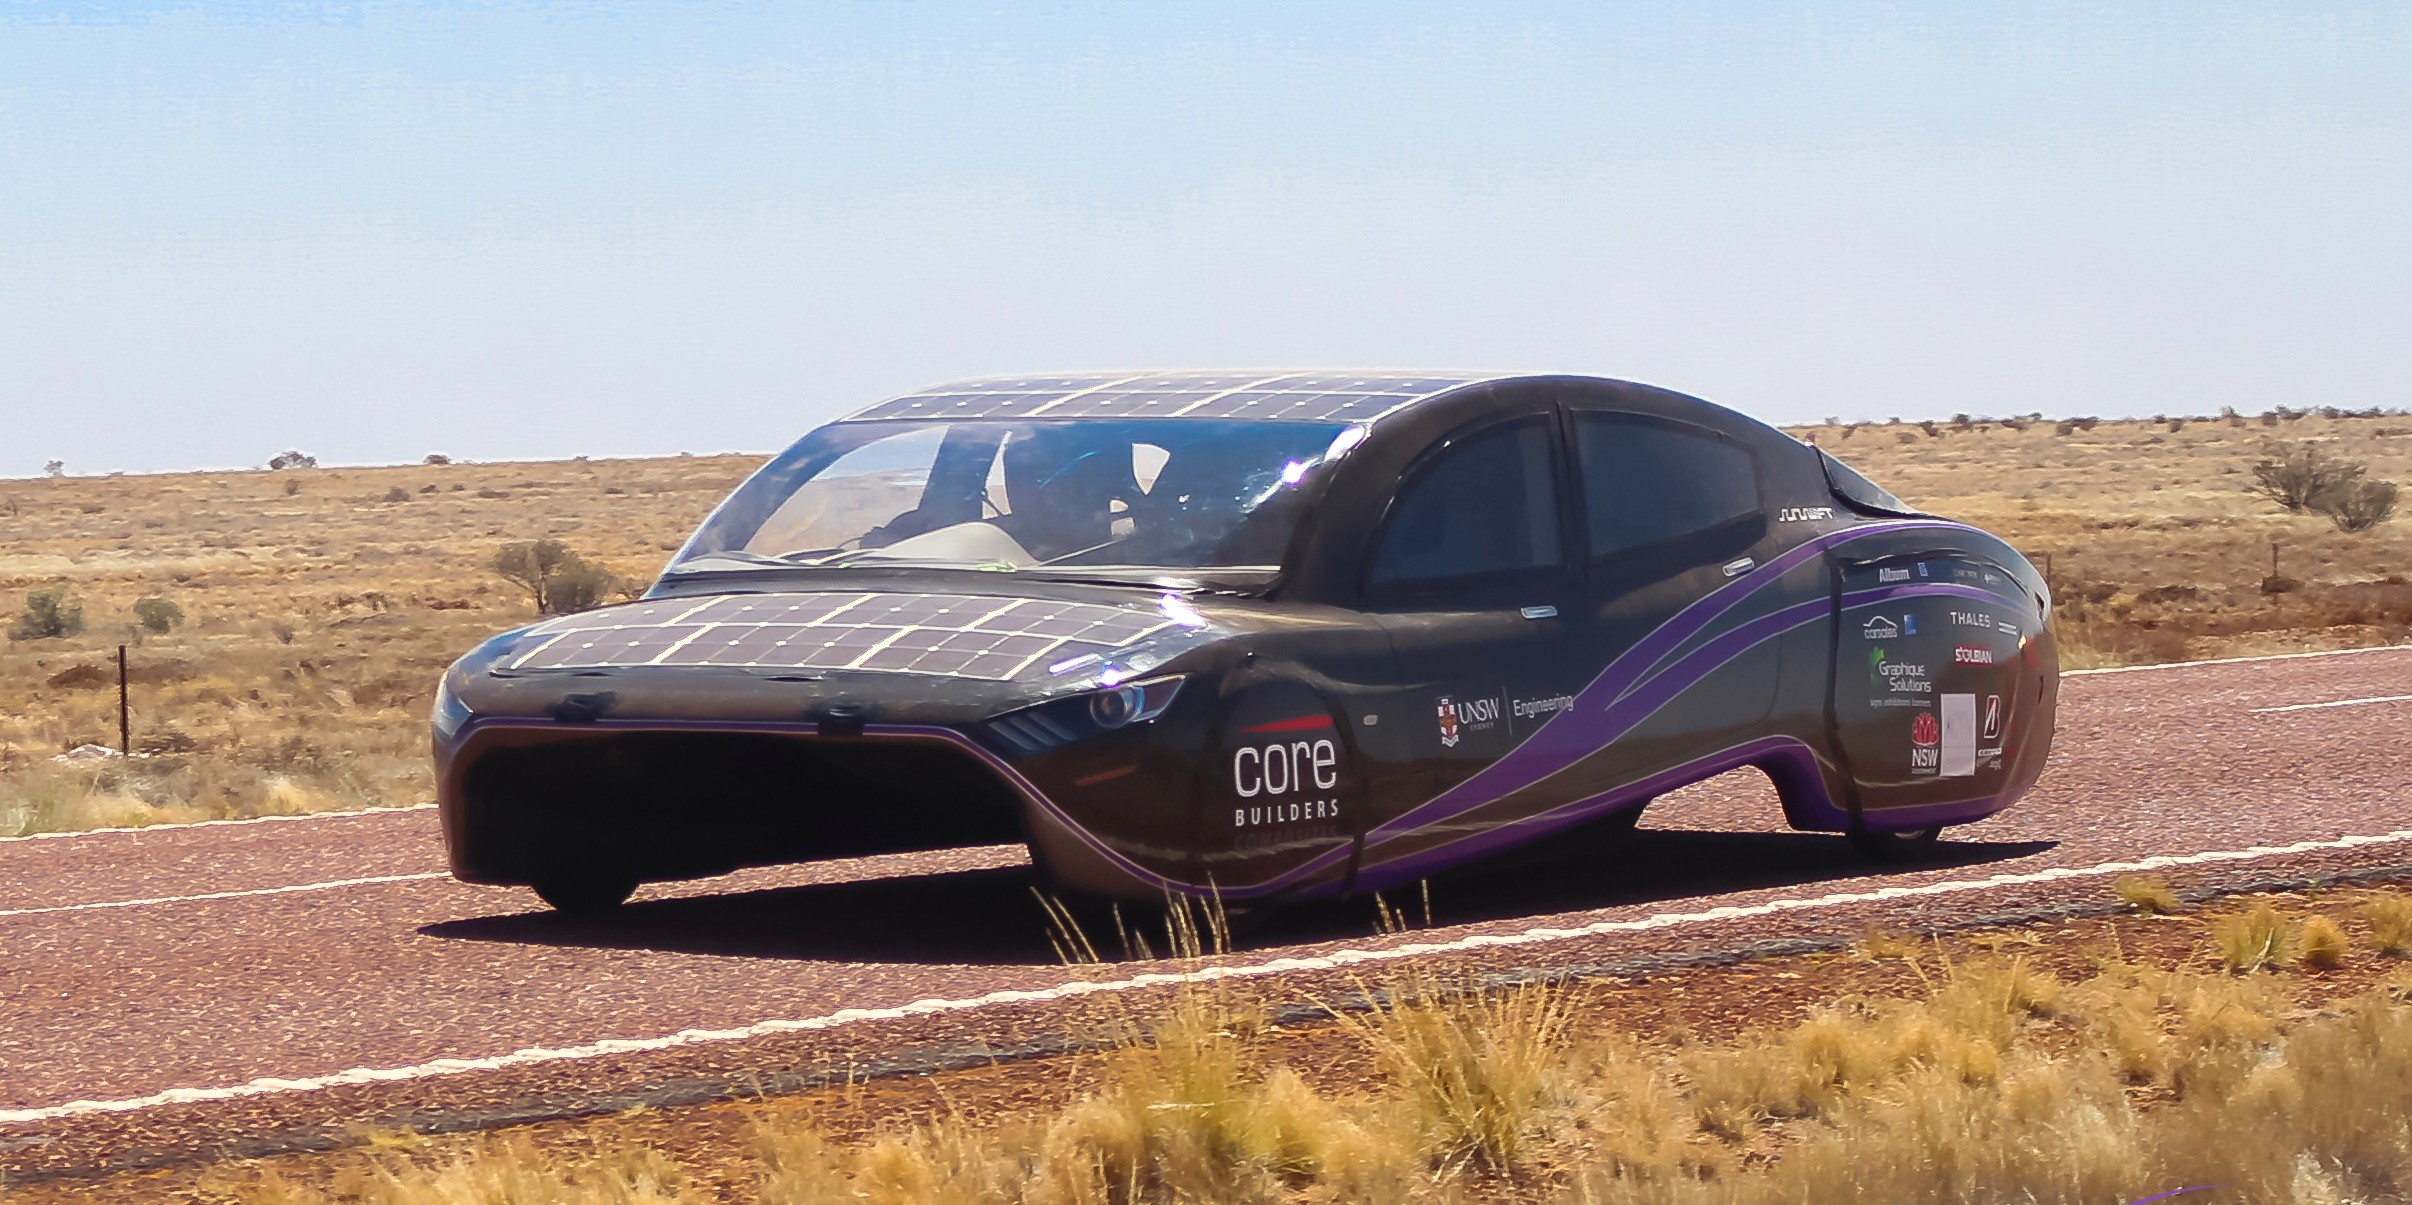 Solarpowered car breaks efficiency record, travels 4,100 km for 50